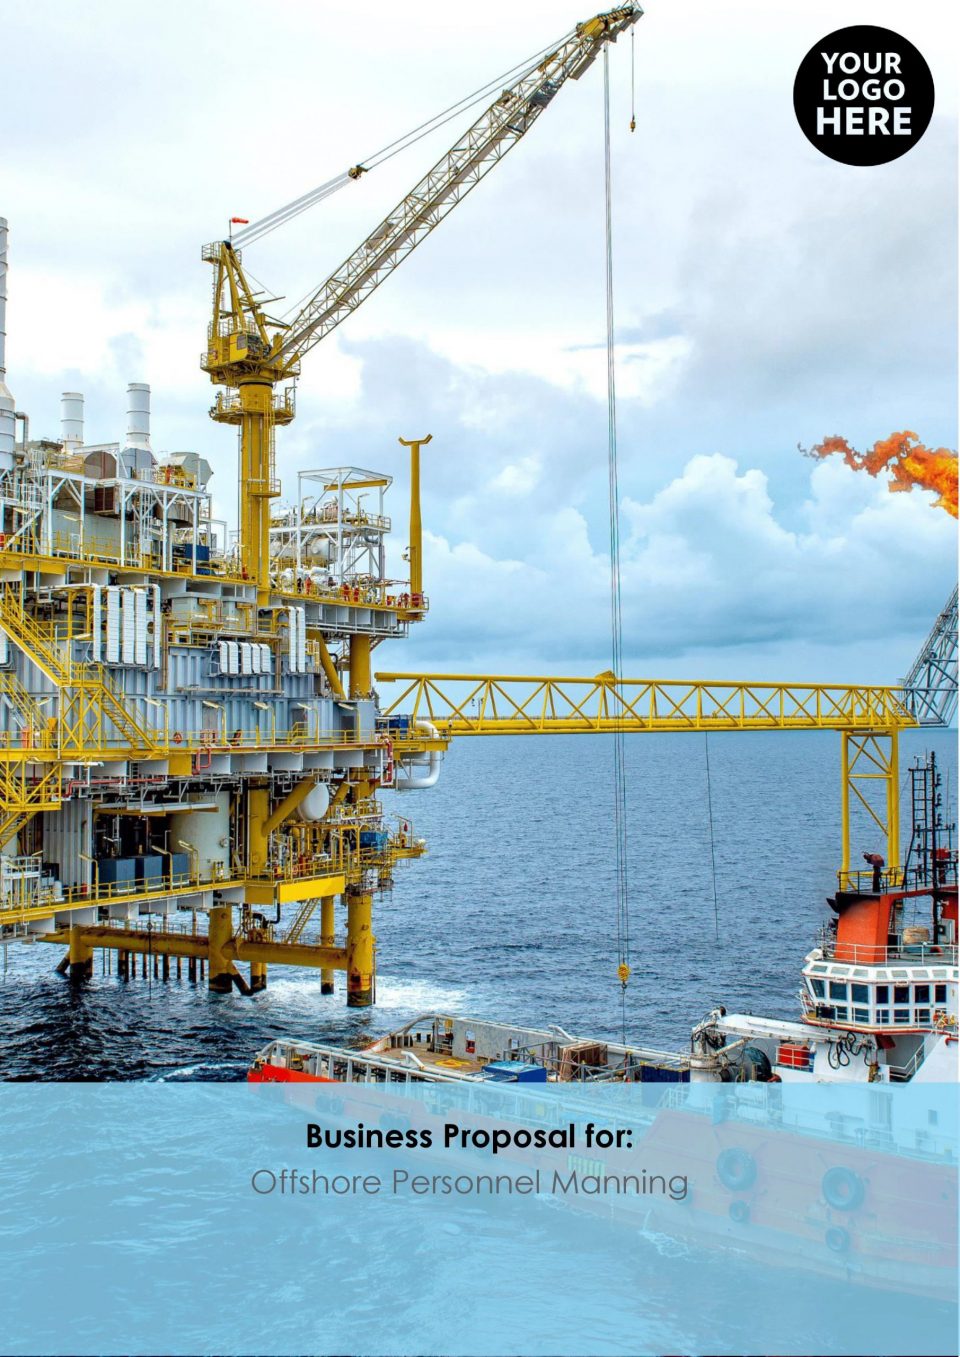 Business Proposal for Offshore Personnel Manning Template 01 scaled